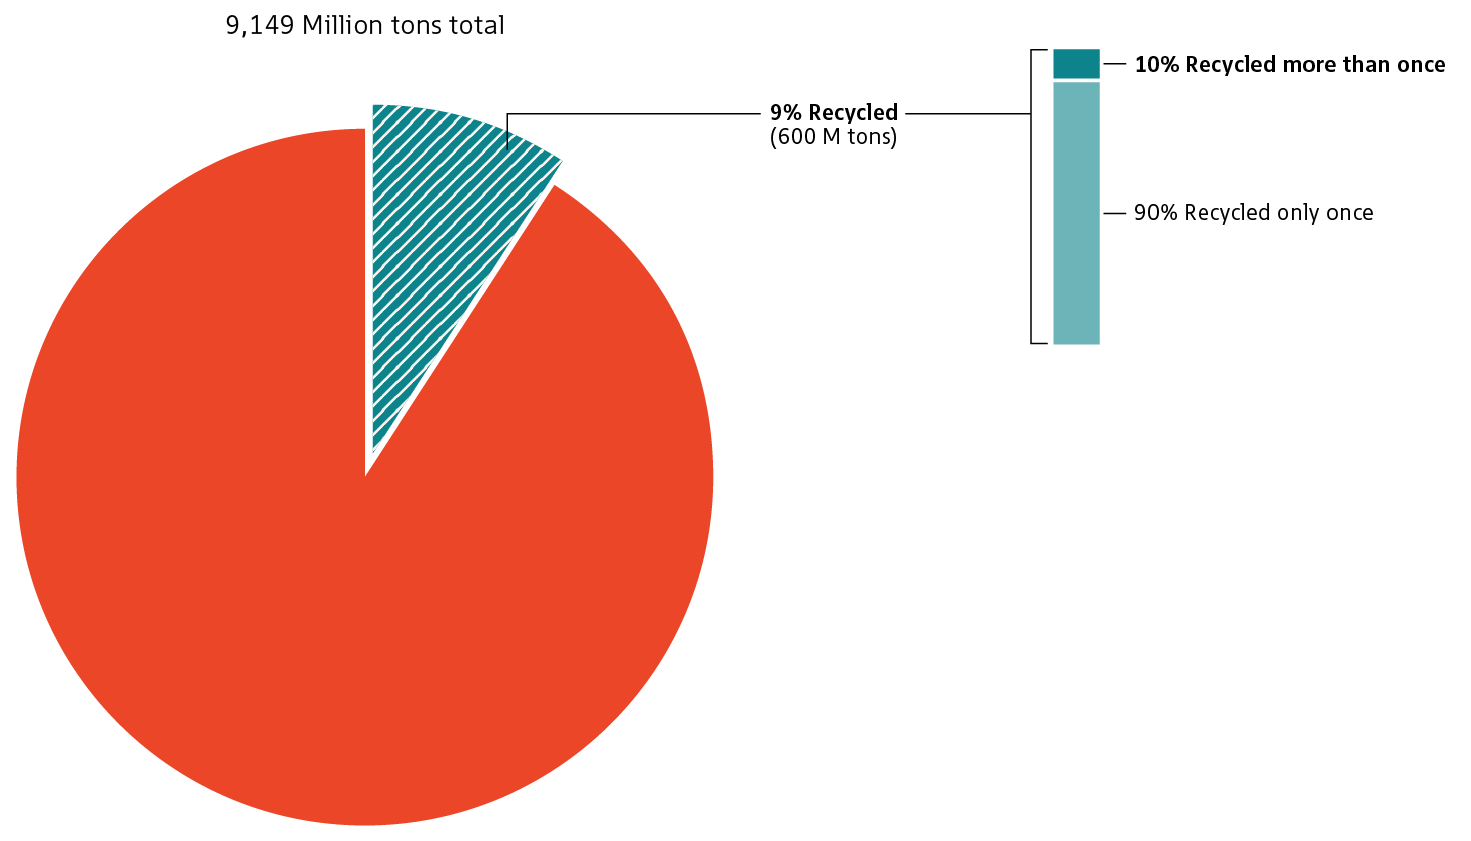 A pie graph has two segments; one with 91% and the other with 9%. The 9% segments represents the total amount of plastics ever recycled around the world from 1950 to 2015. A leader line extends from the 9% segment to a stacked bar graph illustrating that only 10% of all recycled plastics have been recycled more than once.